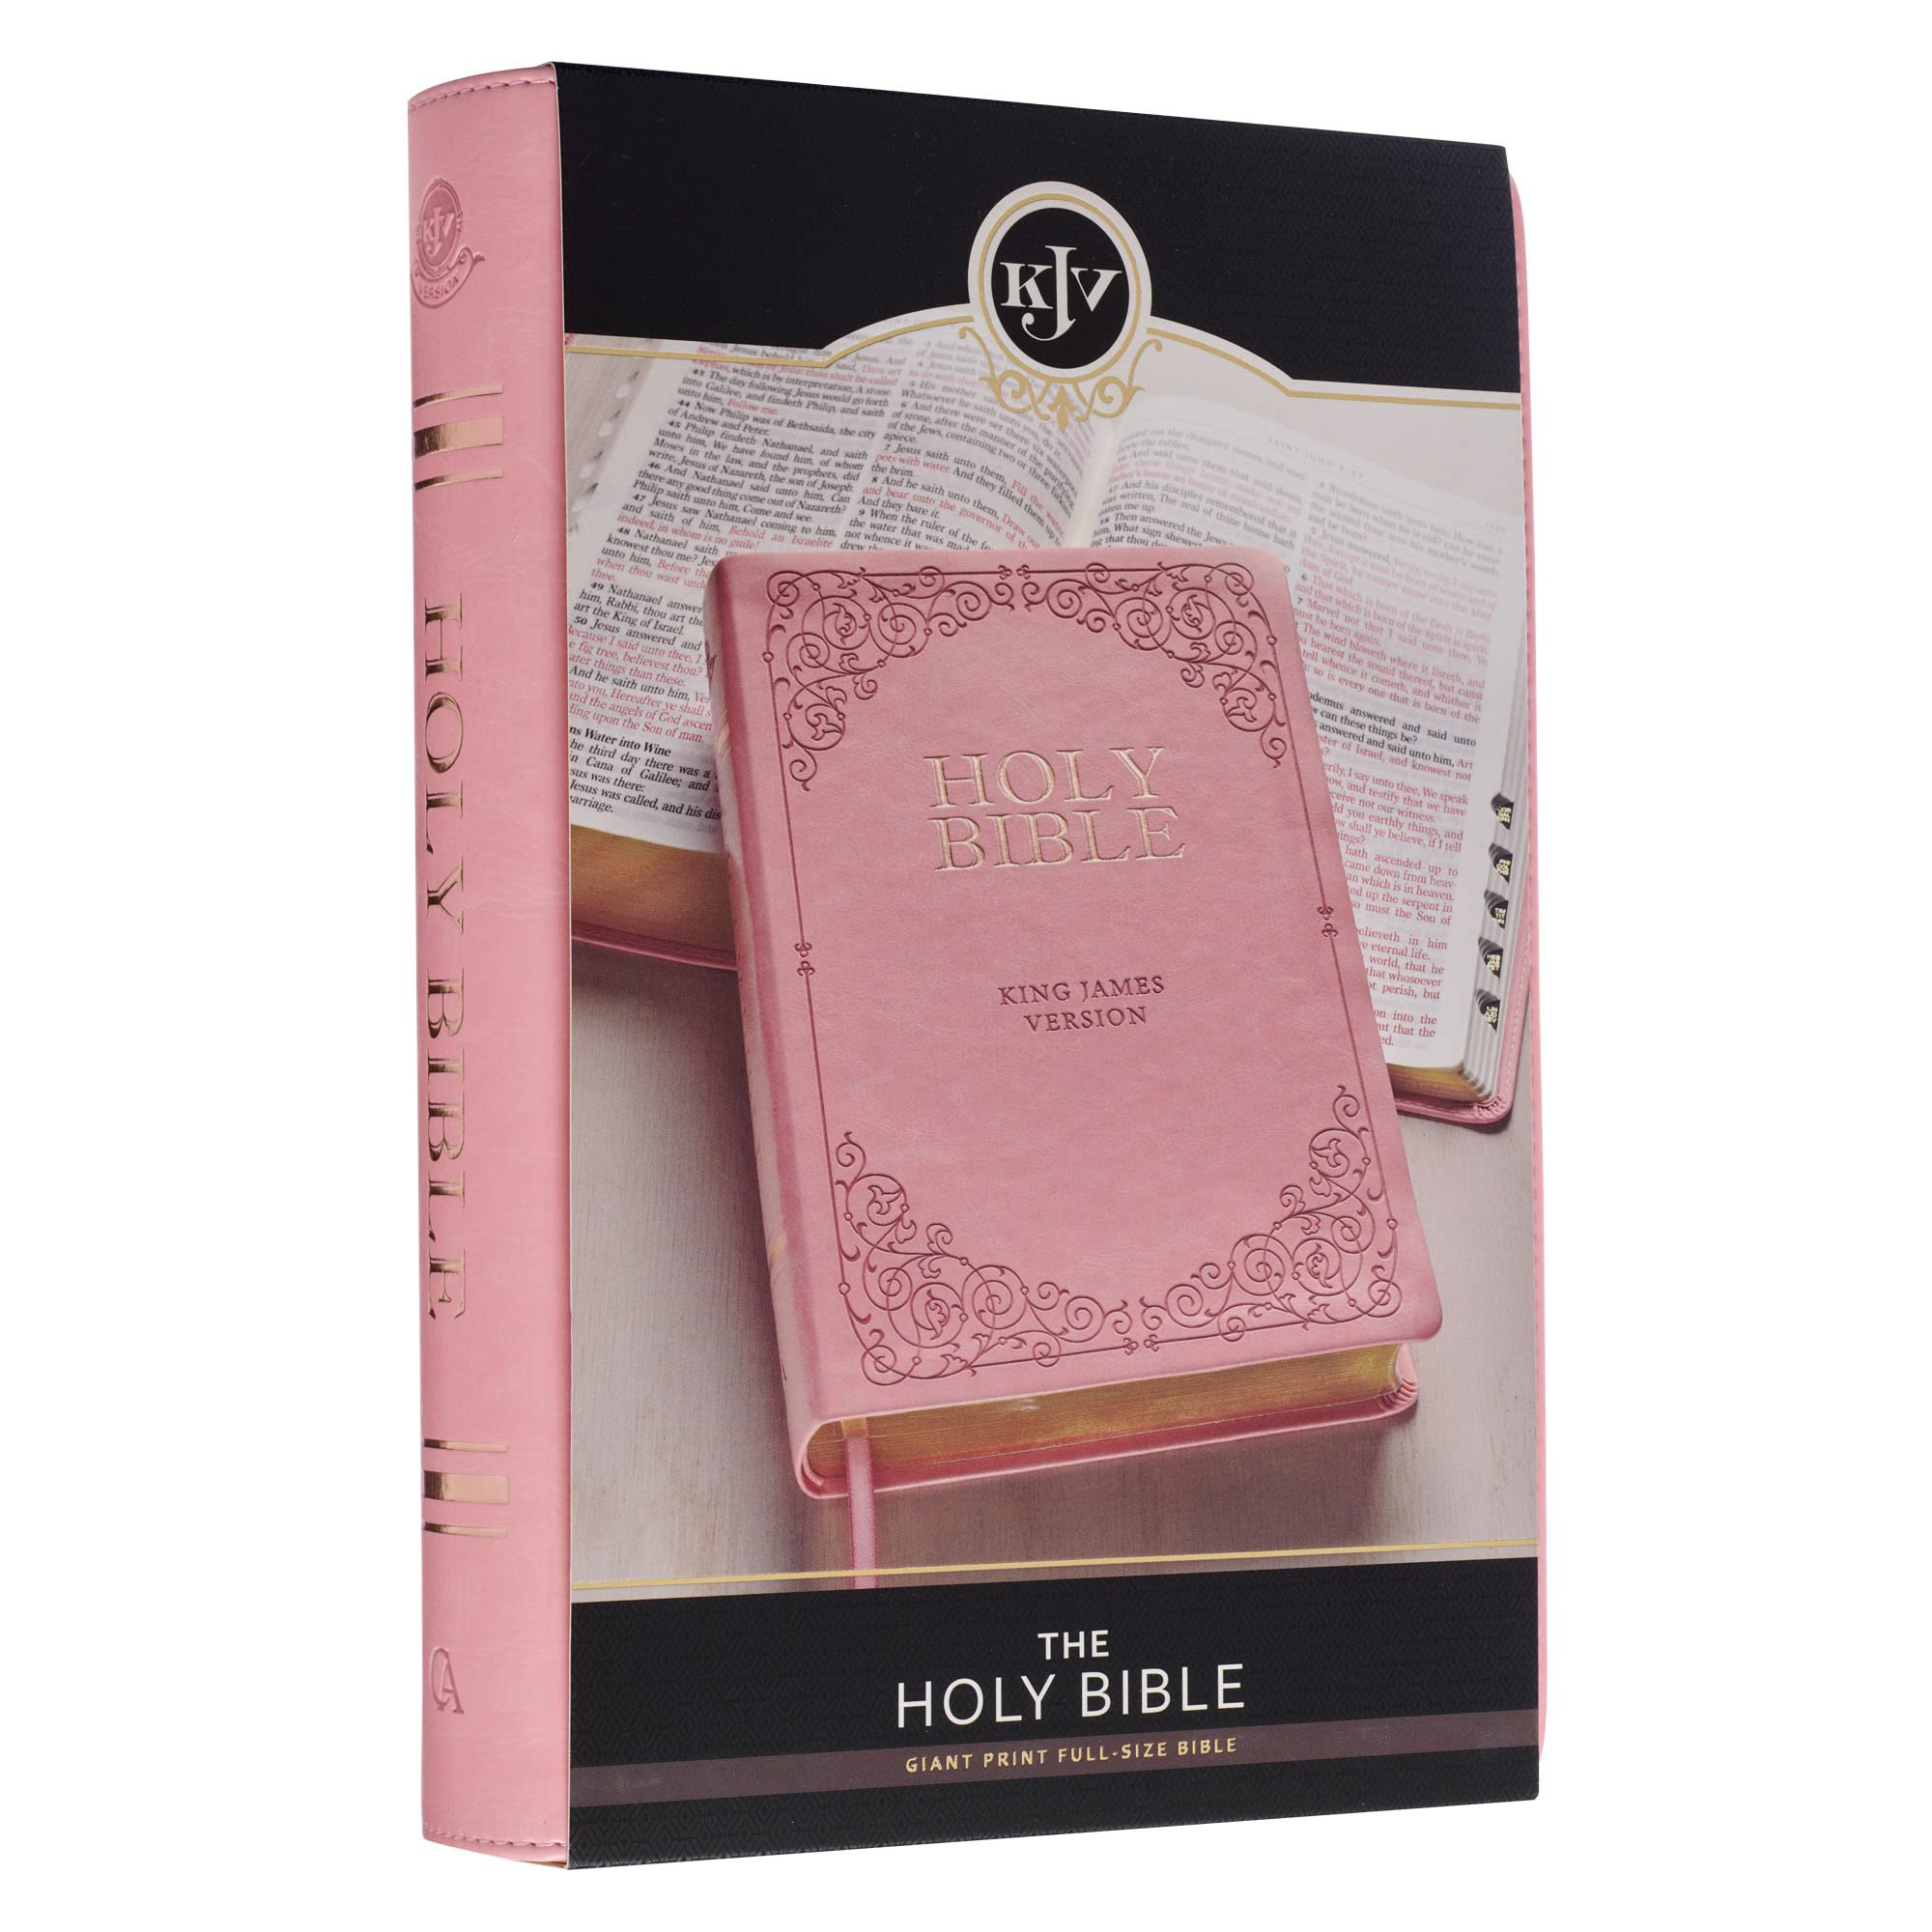 KJV Holy Bible, Giant Print Full-size Faux Leather Red Letter Edition - Thumb Index & Ribbon Marker, King James Version, Pink